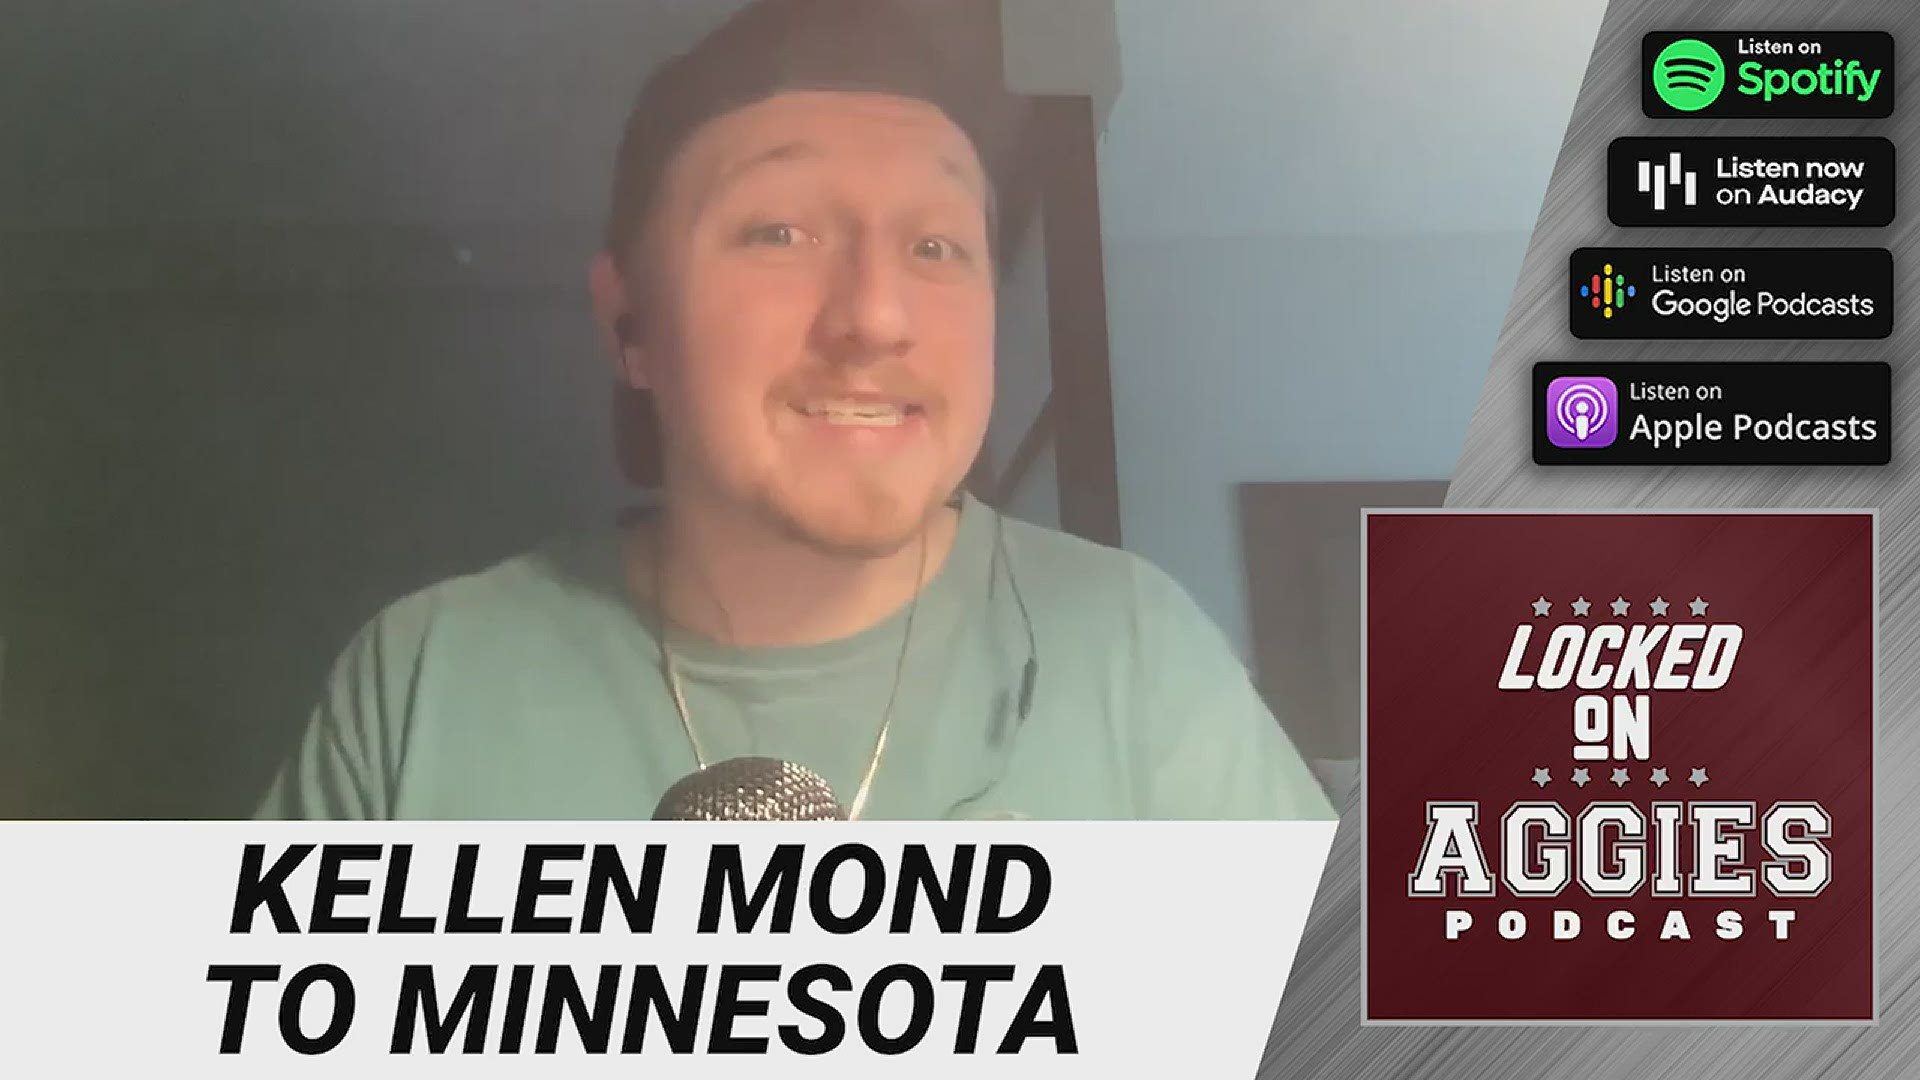 The host of the Locked On Aggies podcast reacts to the team picking Kellen Mond in the second round of the NFL Draft.